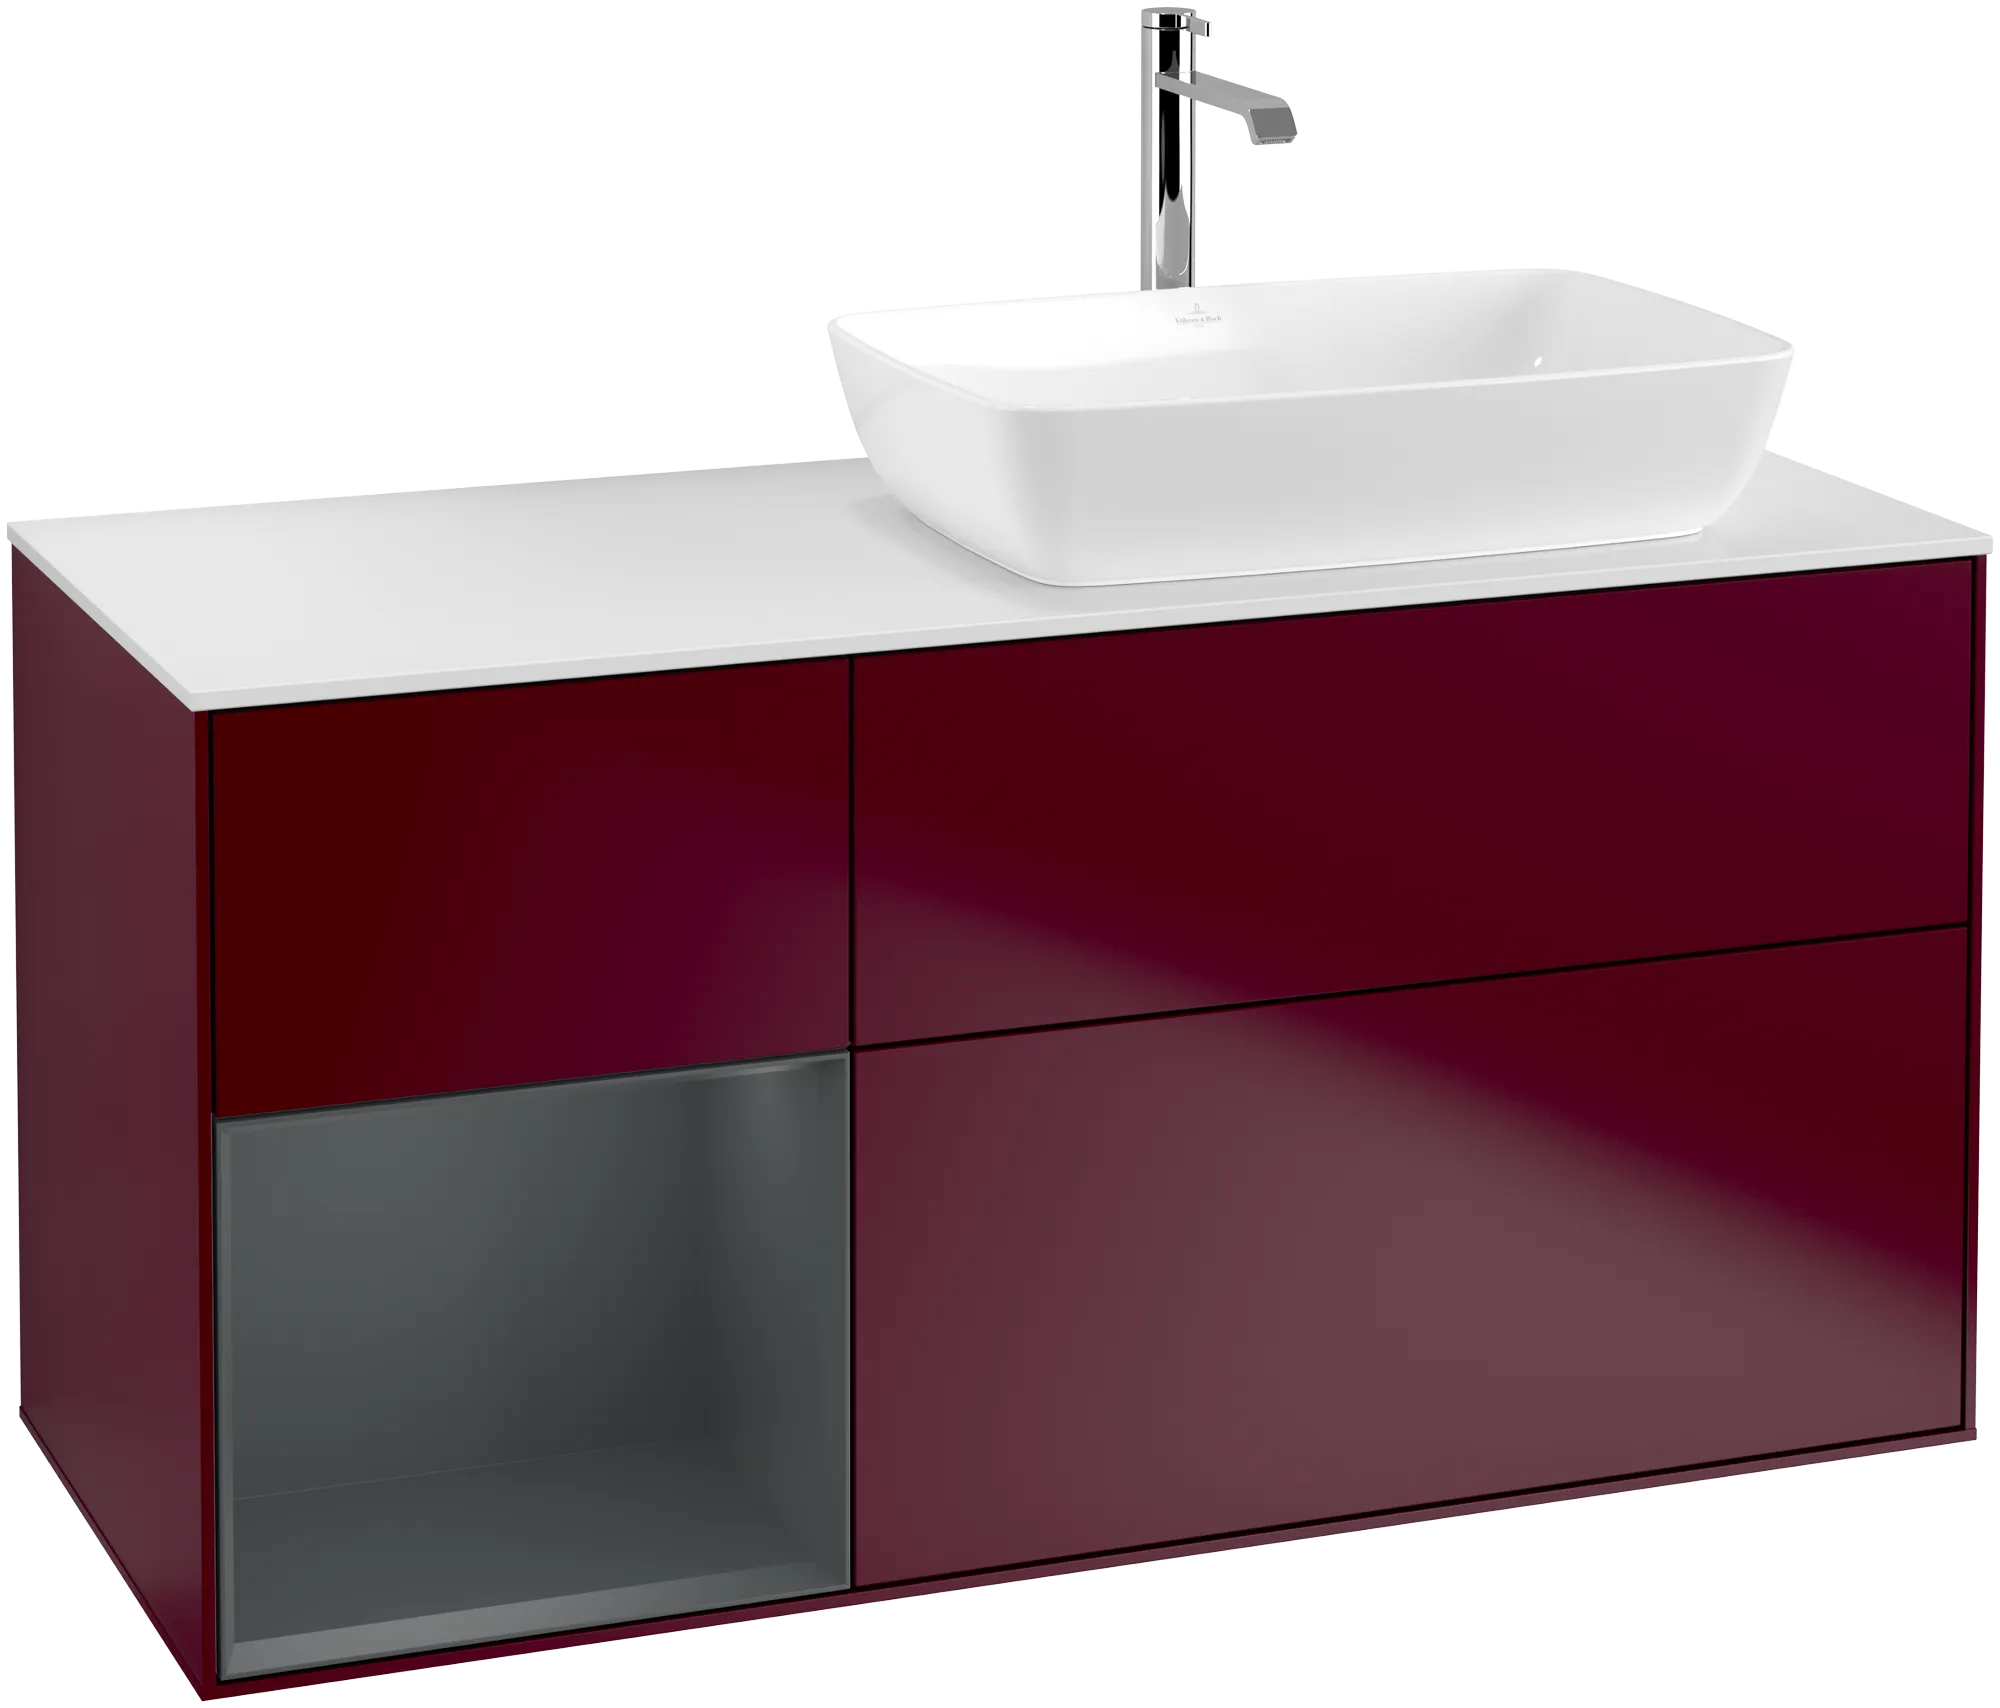 Picture of VILLEROY BOCH Finion Vanity unit, with lighting, 3 pull-out compartments, 1200 x 603 x 501 mm, Peony Matt Lacquer / Midnight Blue Matt Lacquer / Glass White Matt #G801HGHB